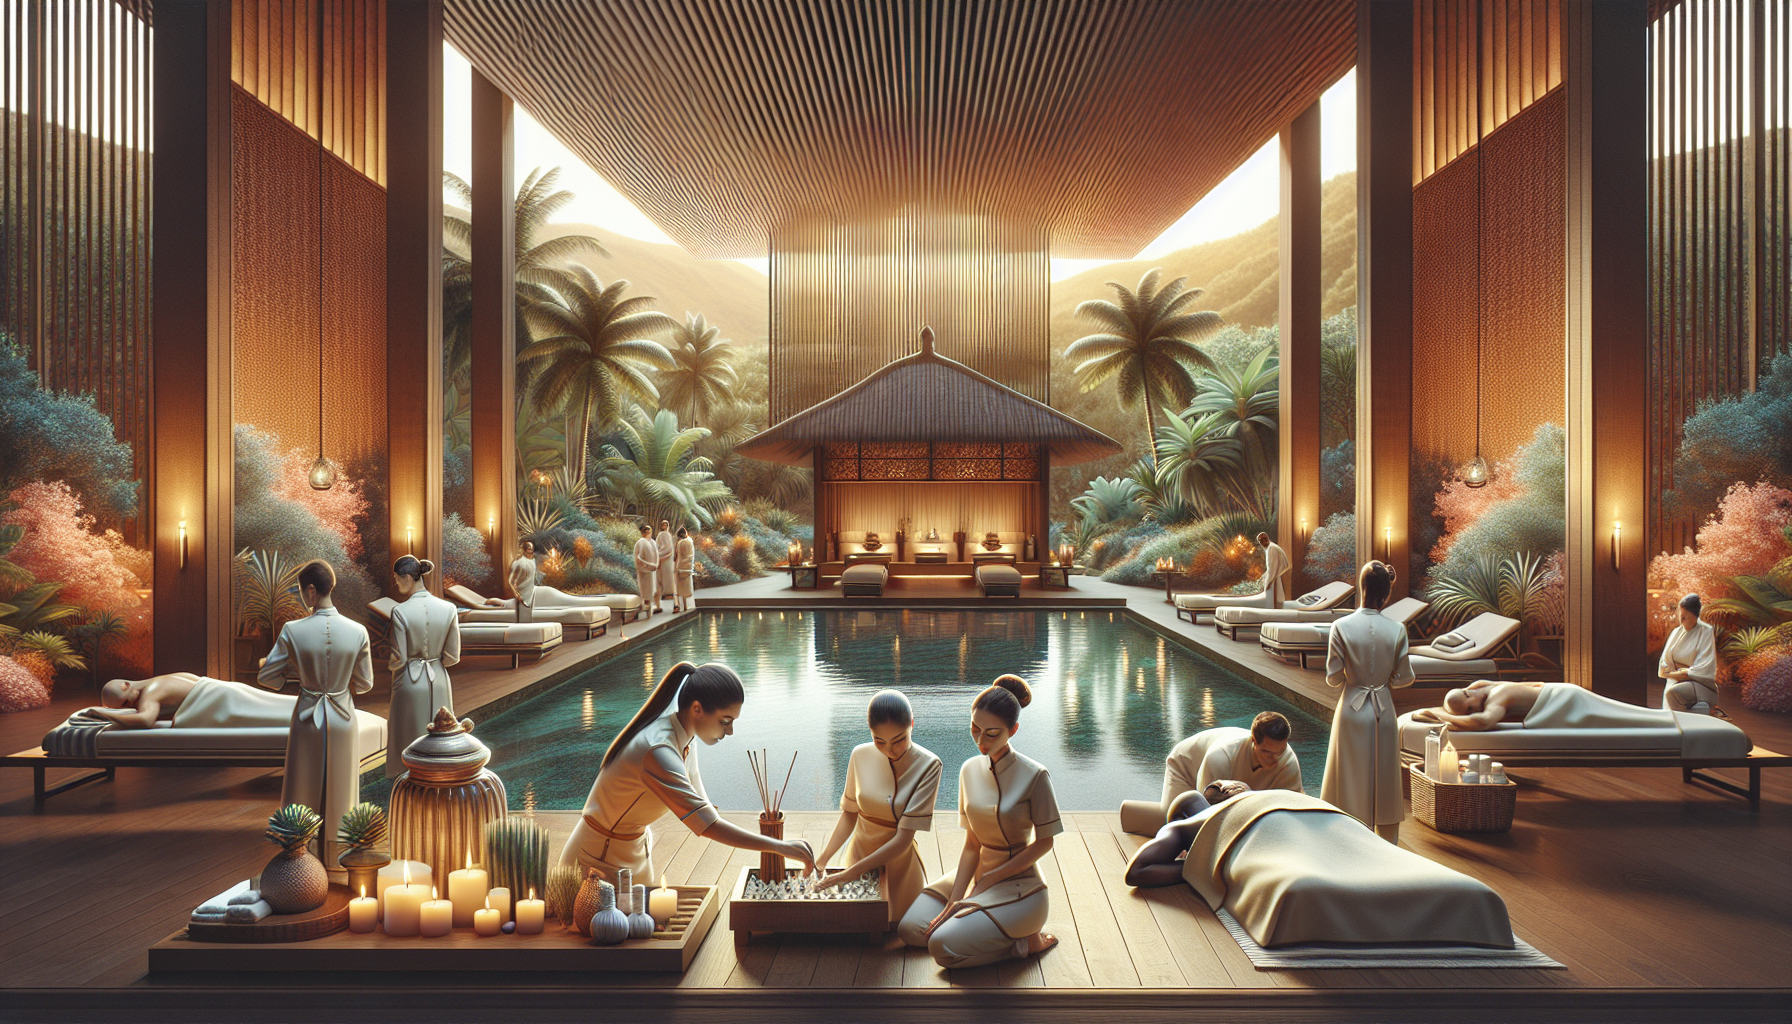 discover the ideal spa retreat to unwind and revitalize yourself with a luxurious experience.